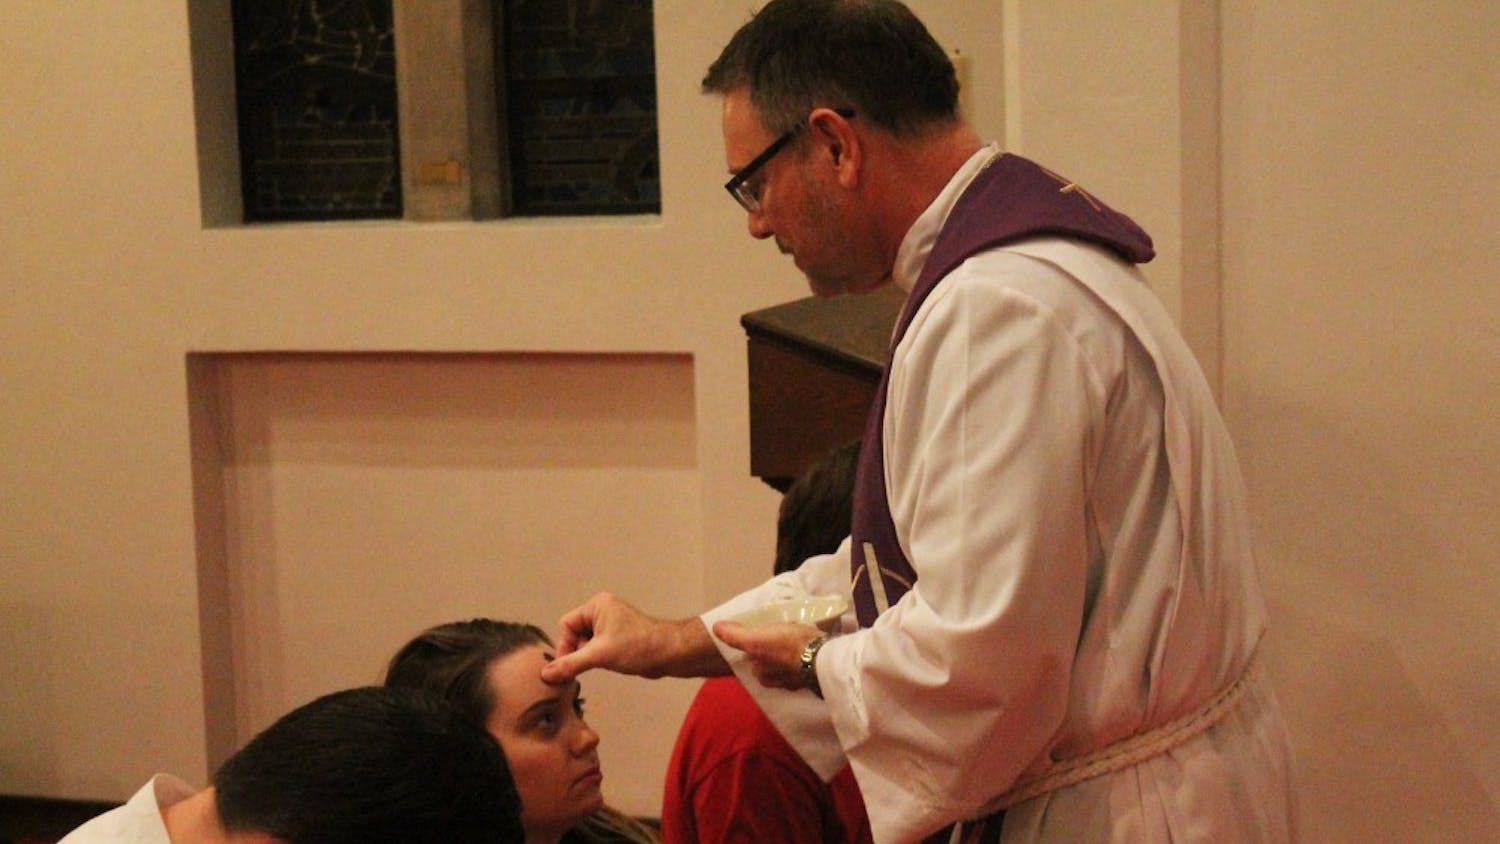 Pastor Richard Woelmer of University Lutheran Church bestows ashes onto the foreheads of churchgoers. This event took place at 7 p.m. Wednesday.